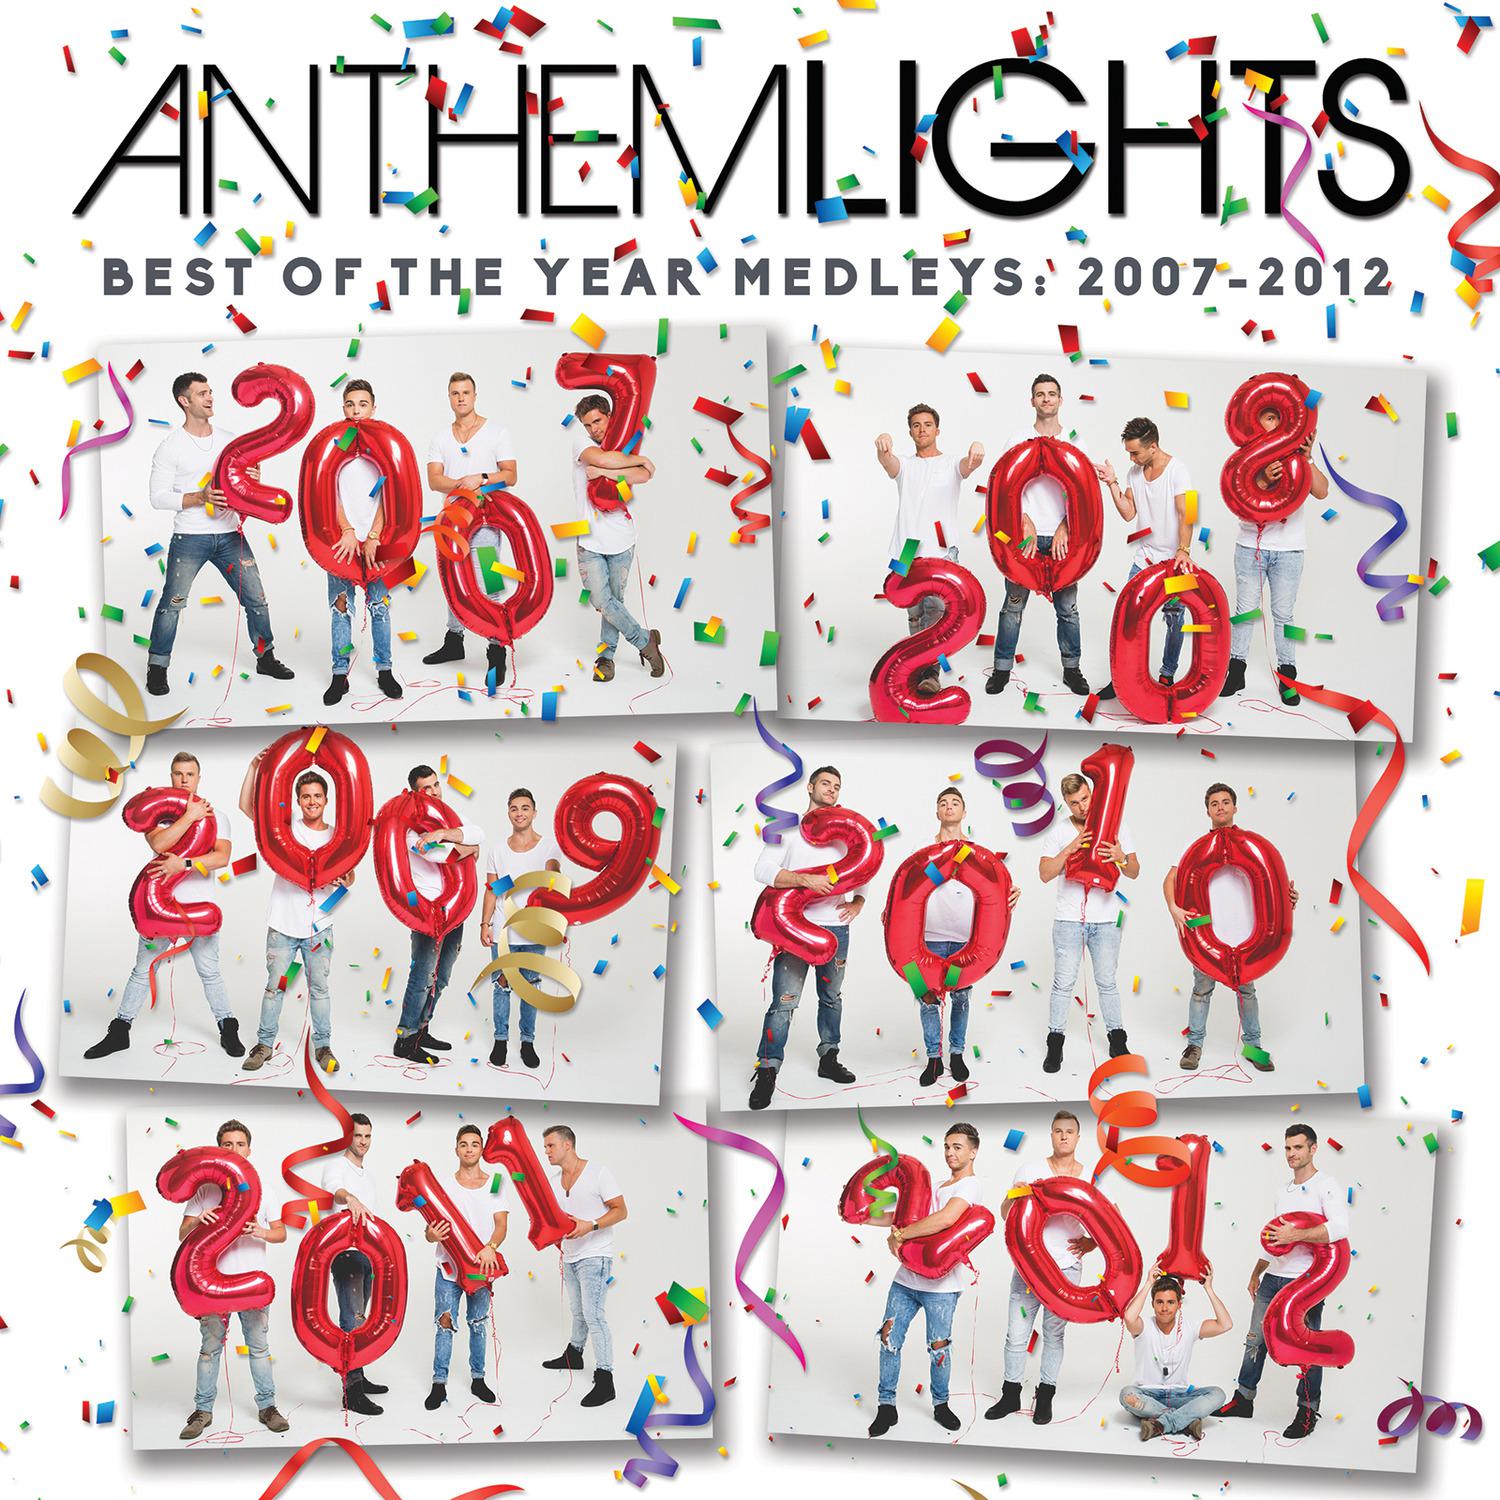 Best of 2011: Just the Way You Are / For the First Time / Someone Like You / Superbass / Grenade / Without You歌词 歌手Anthem Lights-专辑Best of the Year Medleys: 2007 - 2012-单曲《Best of 2011: Just the Way You Are / For the First Time / Someone Like You / Superbass / Grenade / Without You》LRC歌词下载